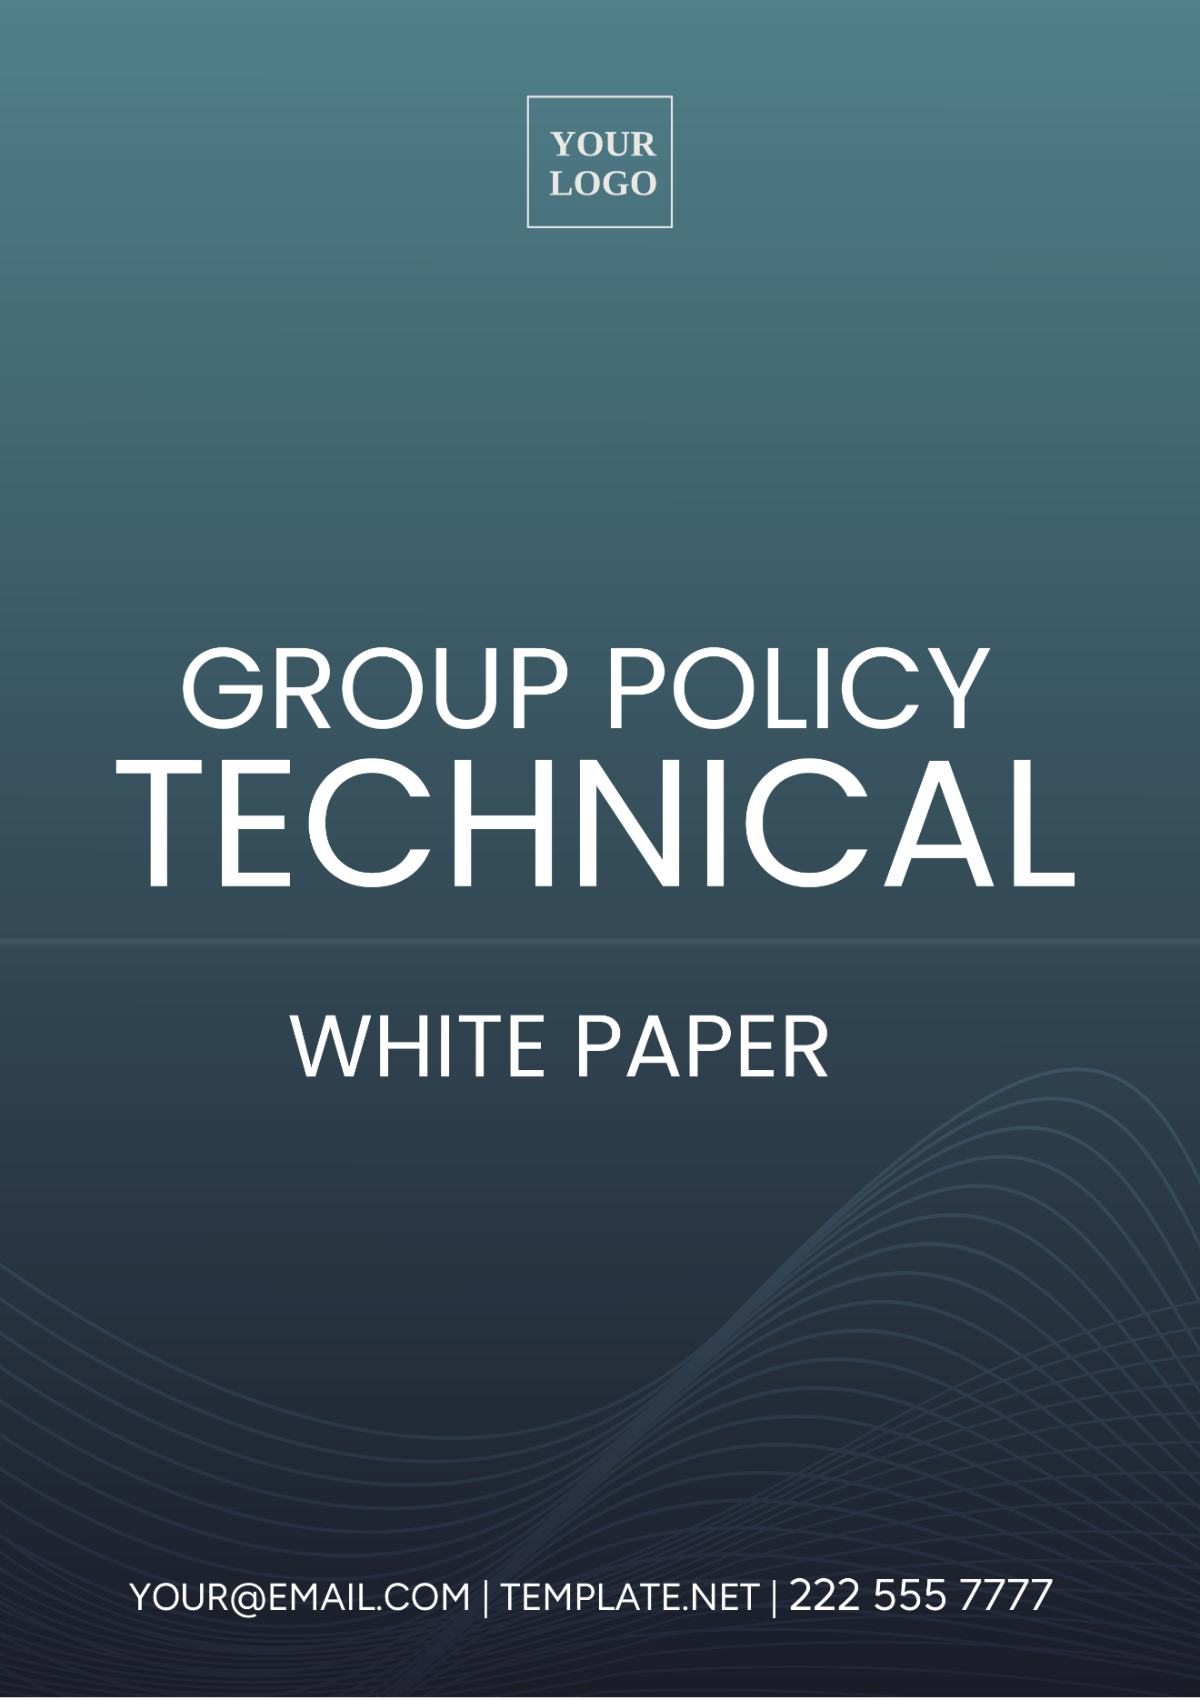 Group Policy Technical White Paper Template